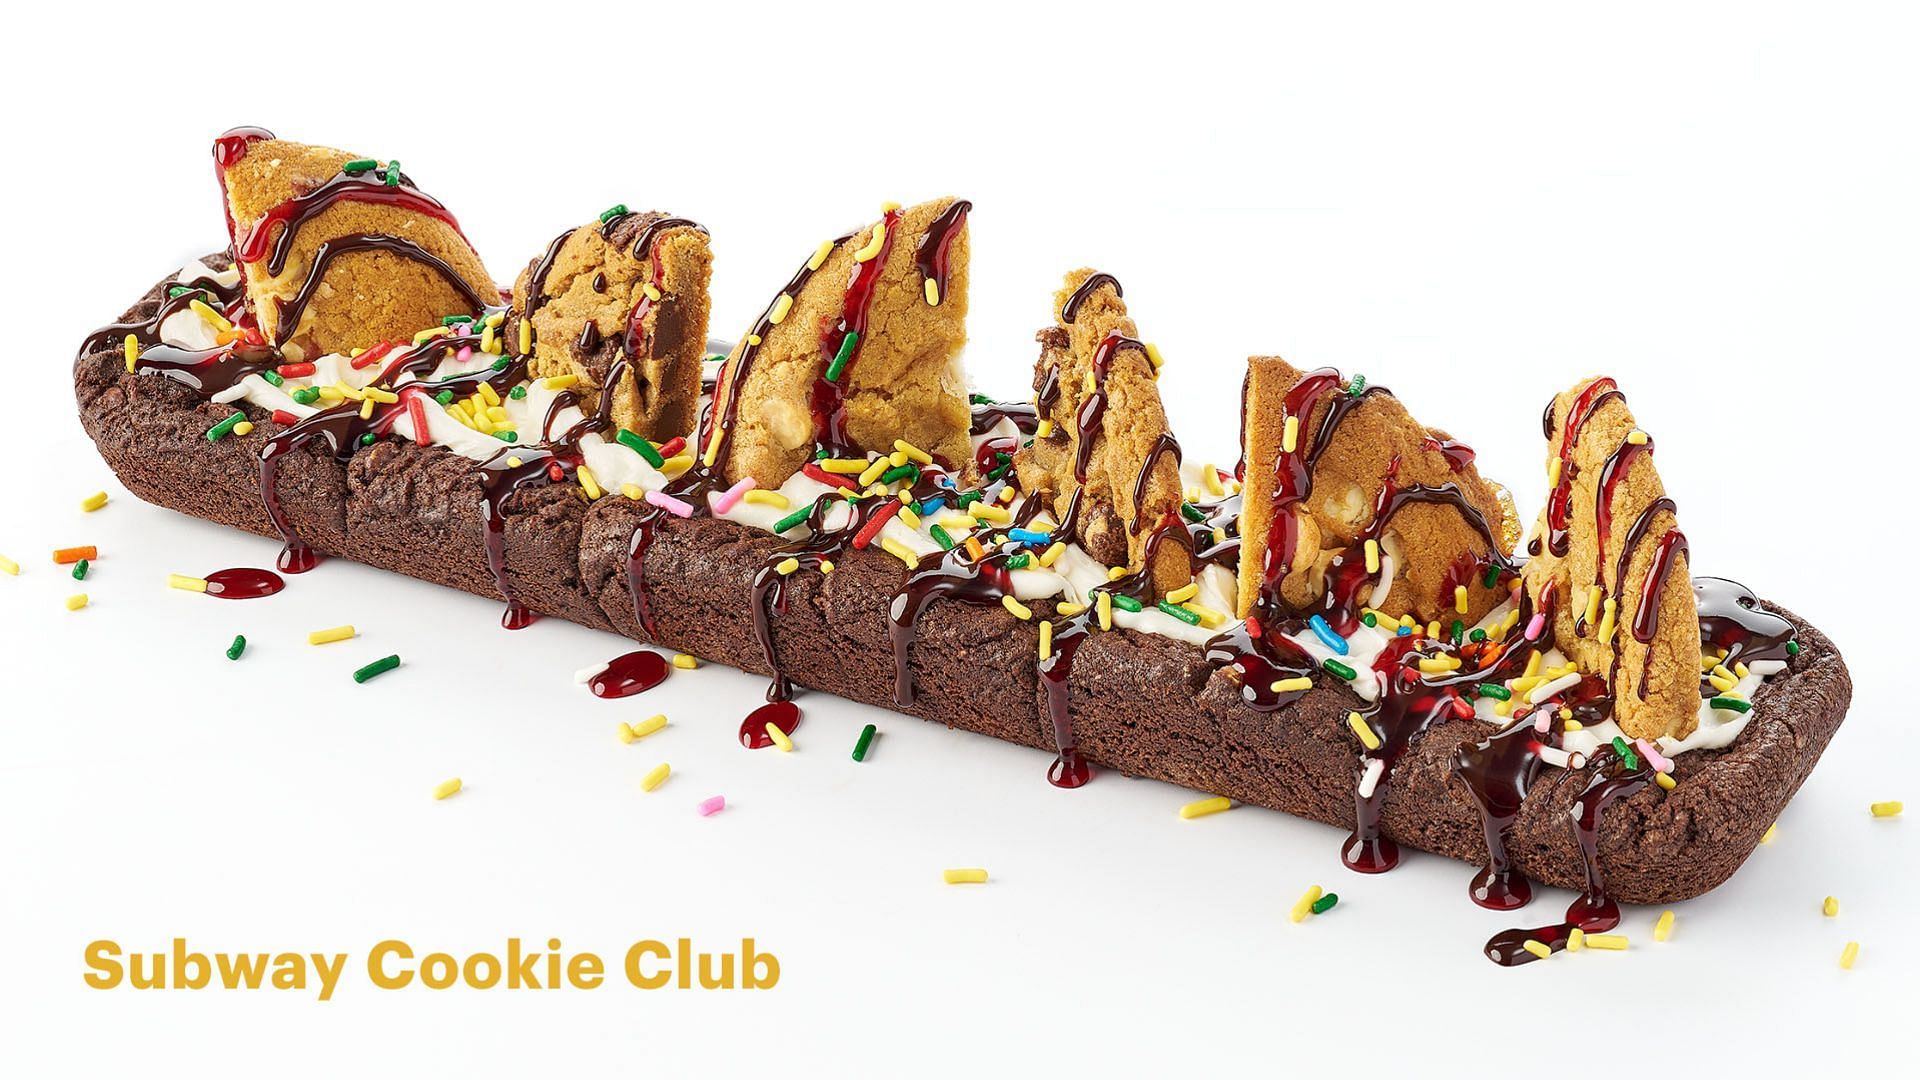 Subway’s Footlong Cookie menu explored as brand launches a new lineup